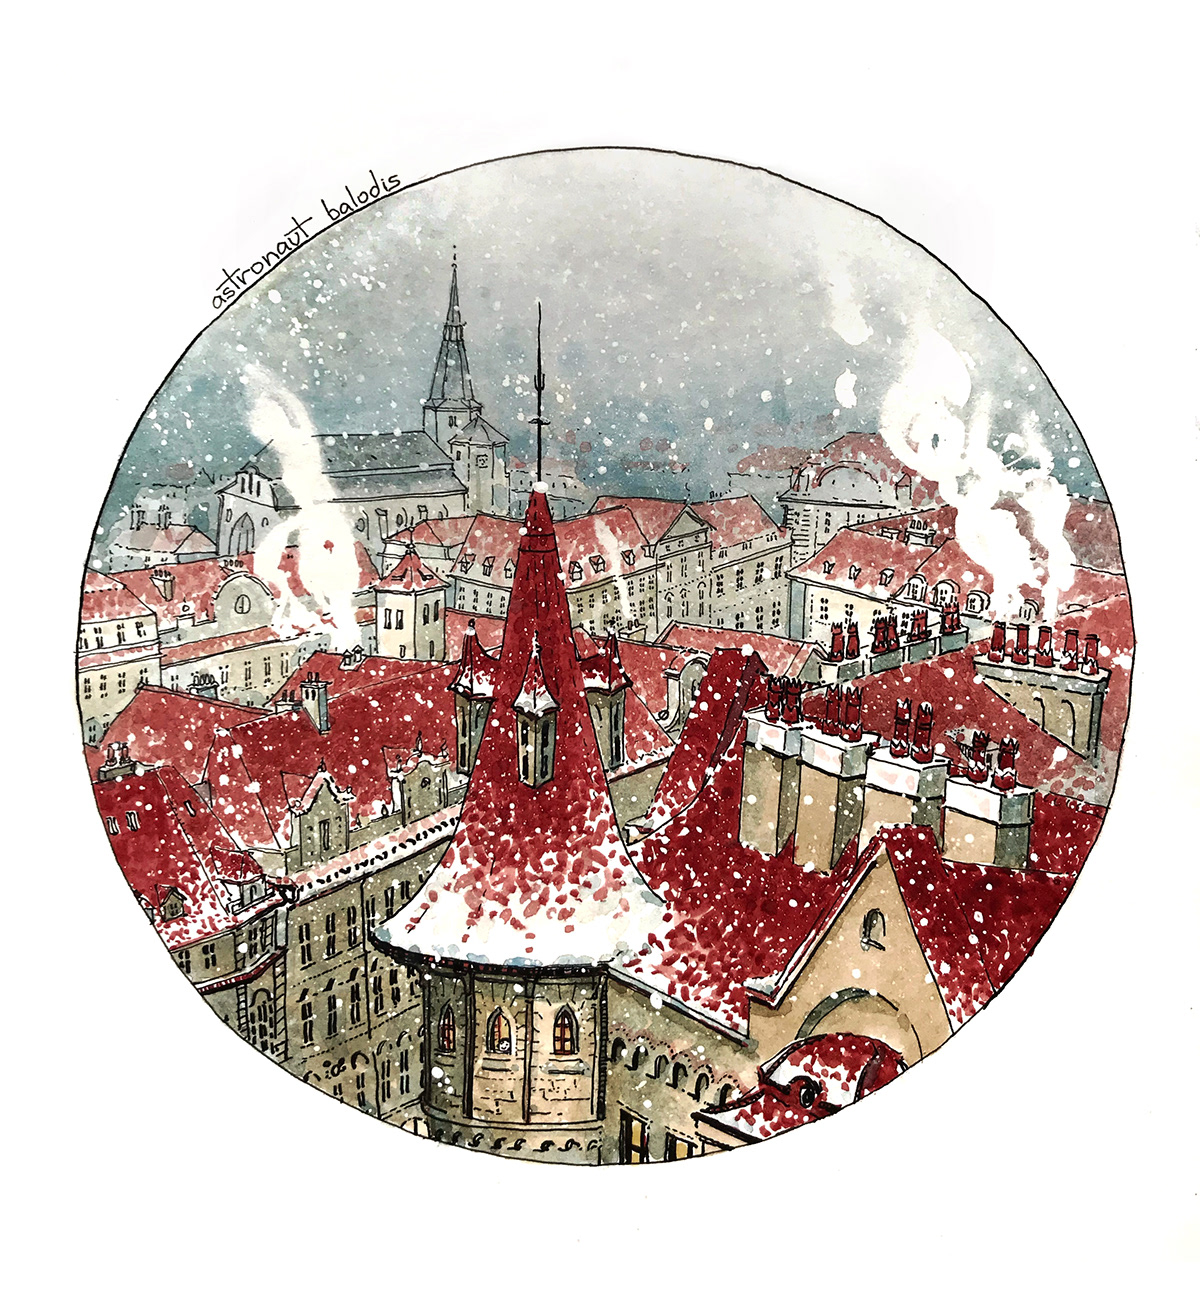 A watercolor illustration depicting an old Eastern European city in winter.